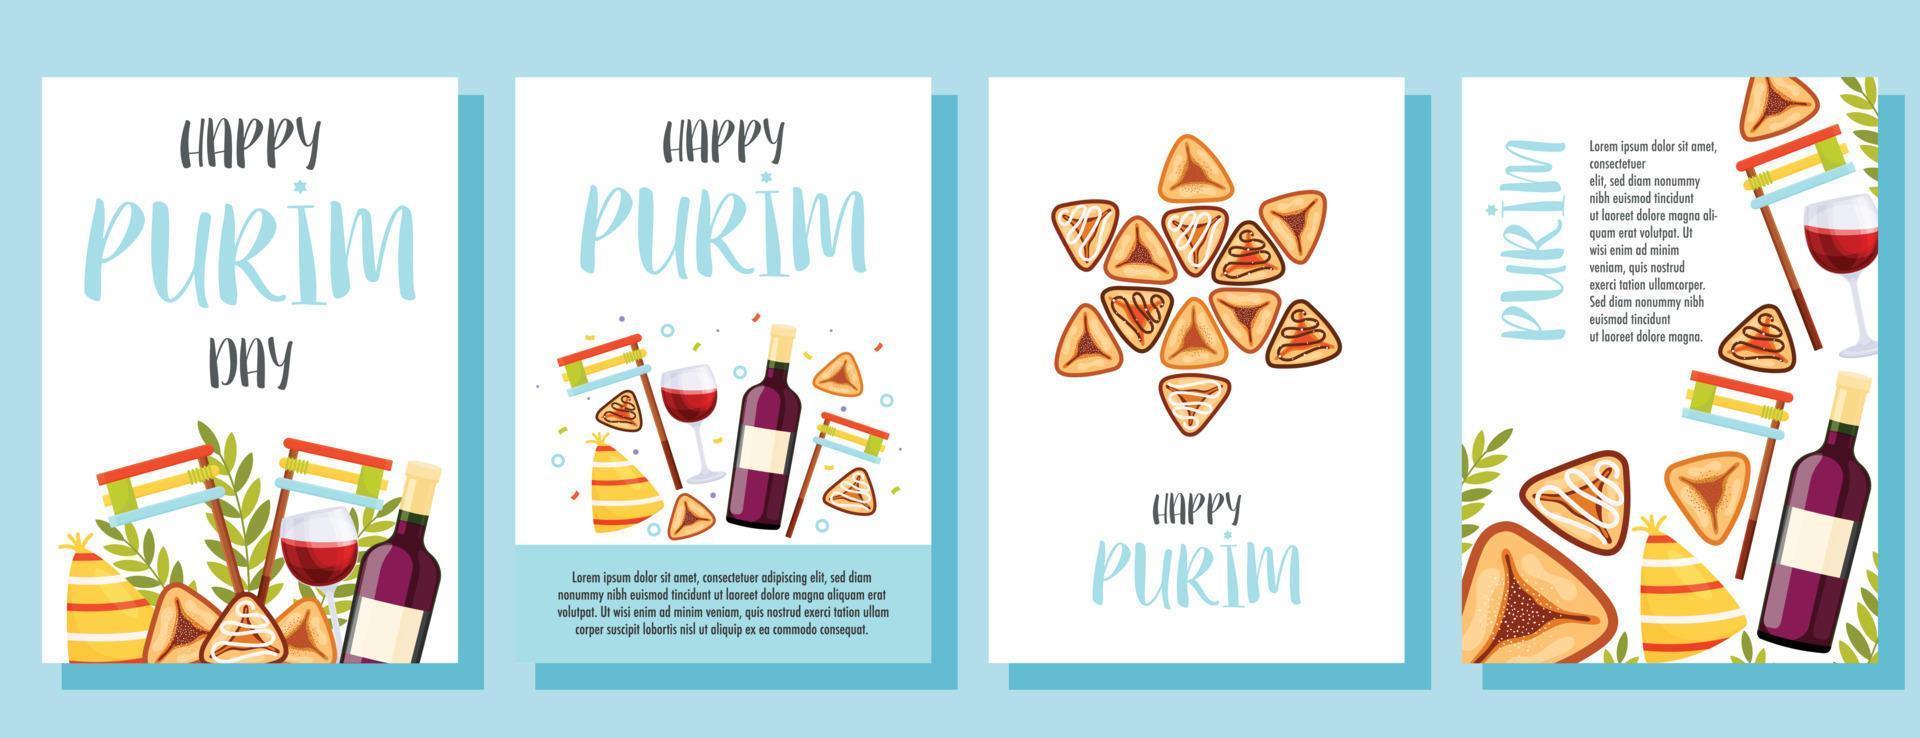 Happy Purim day greeting card vector